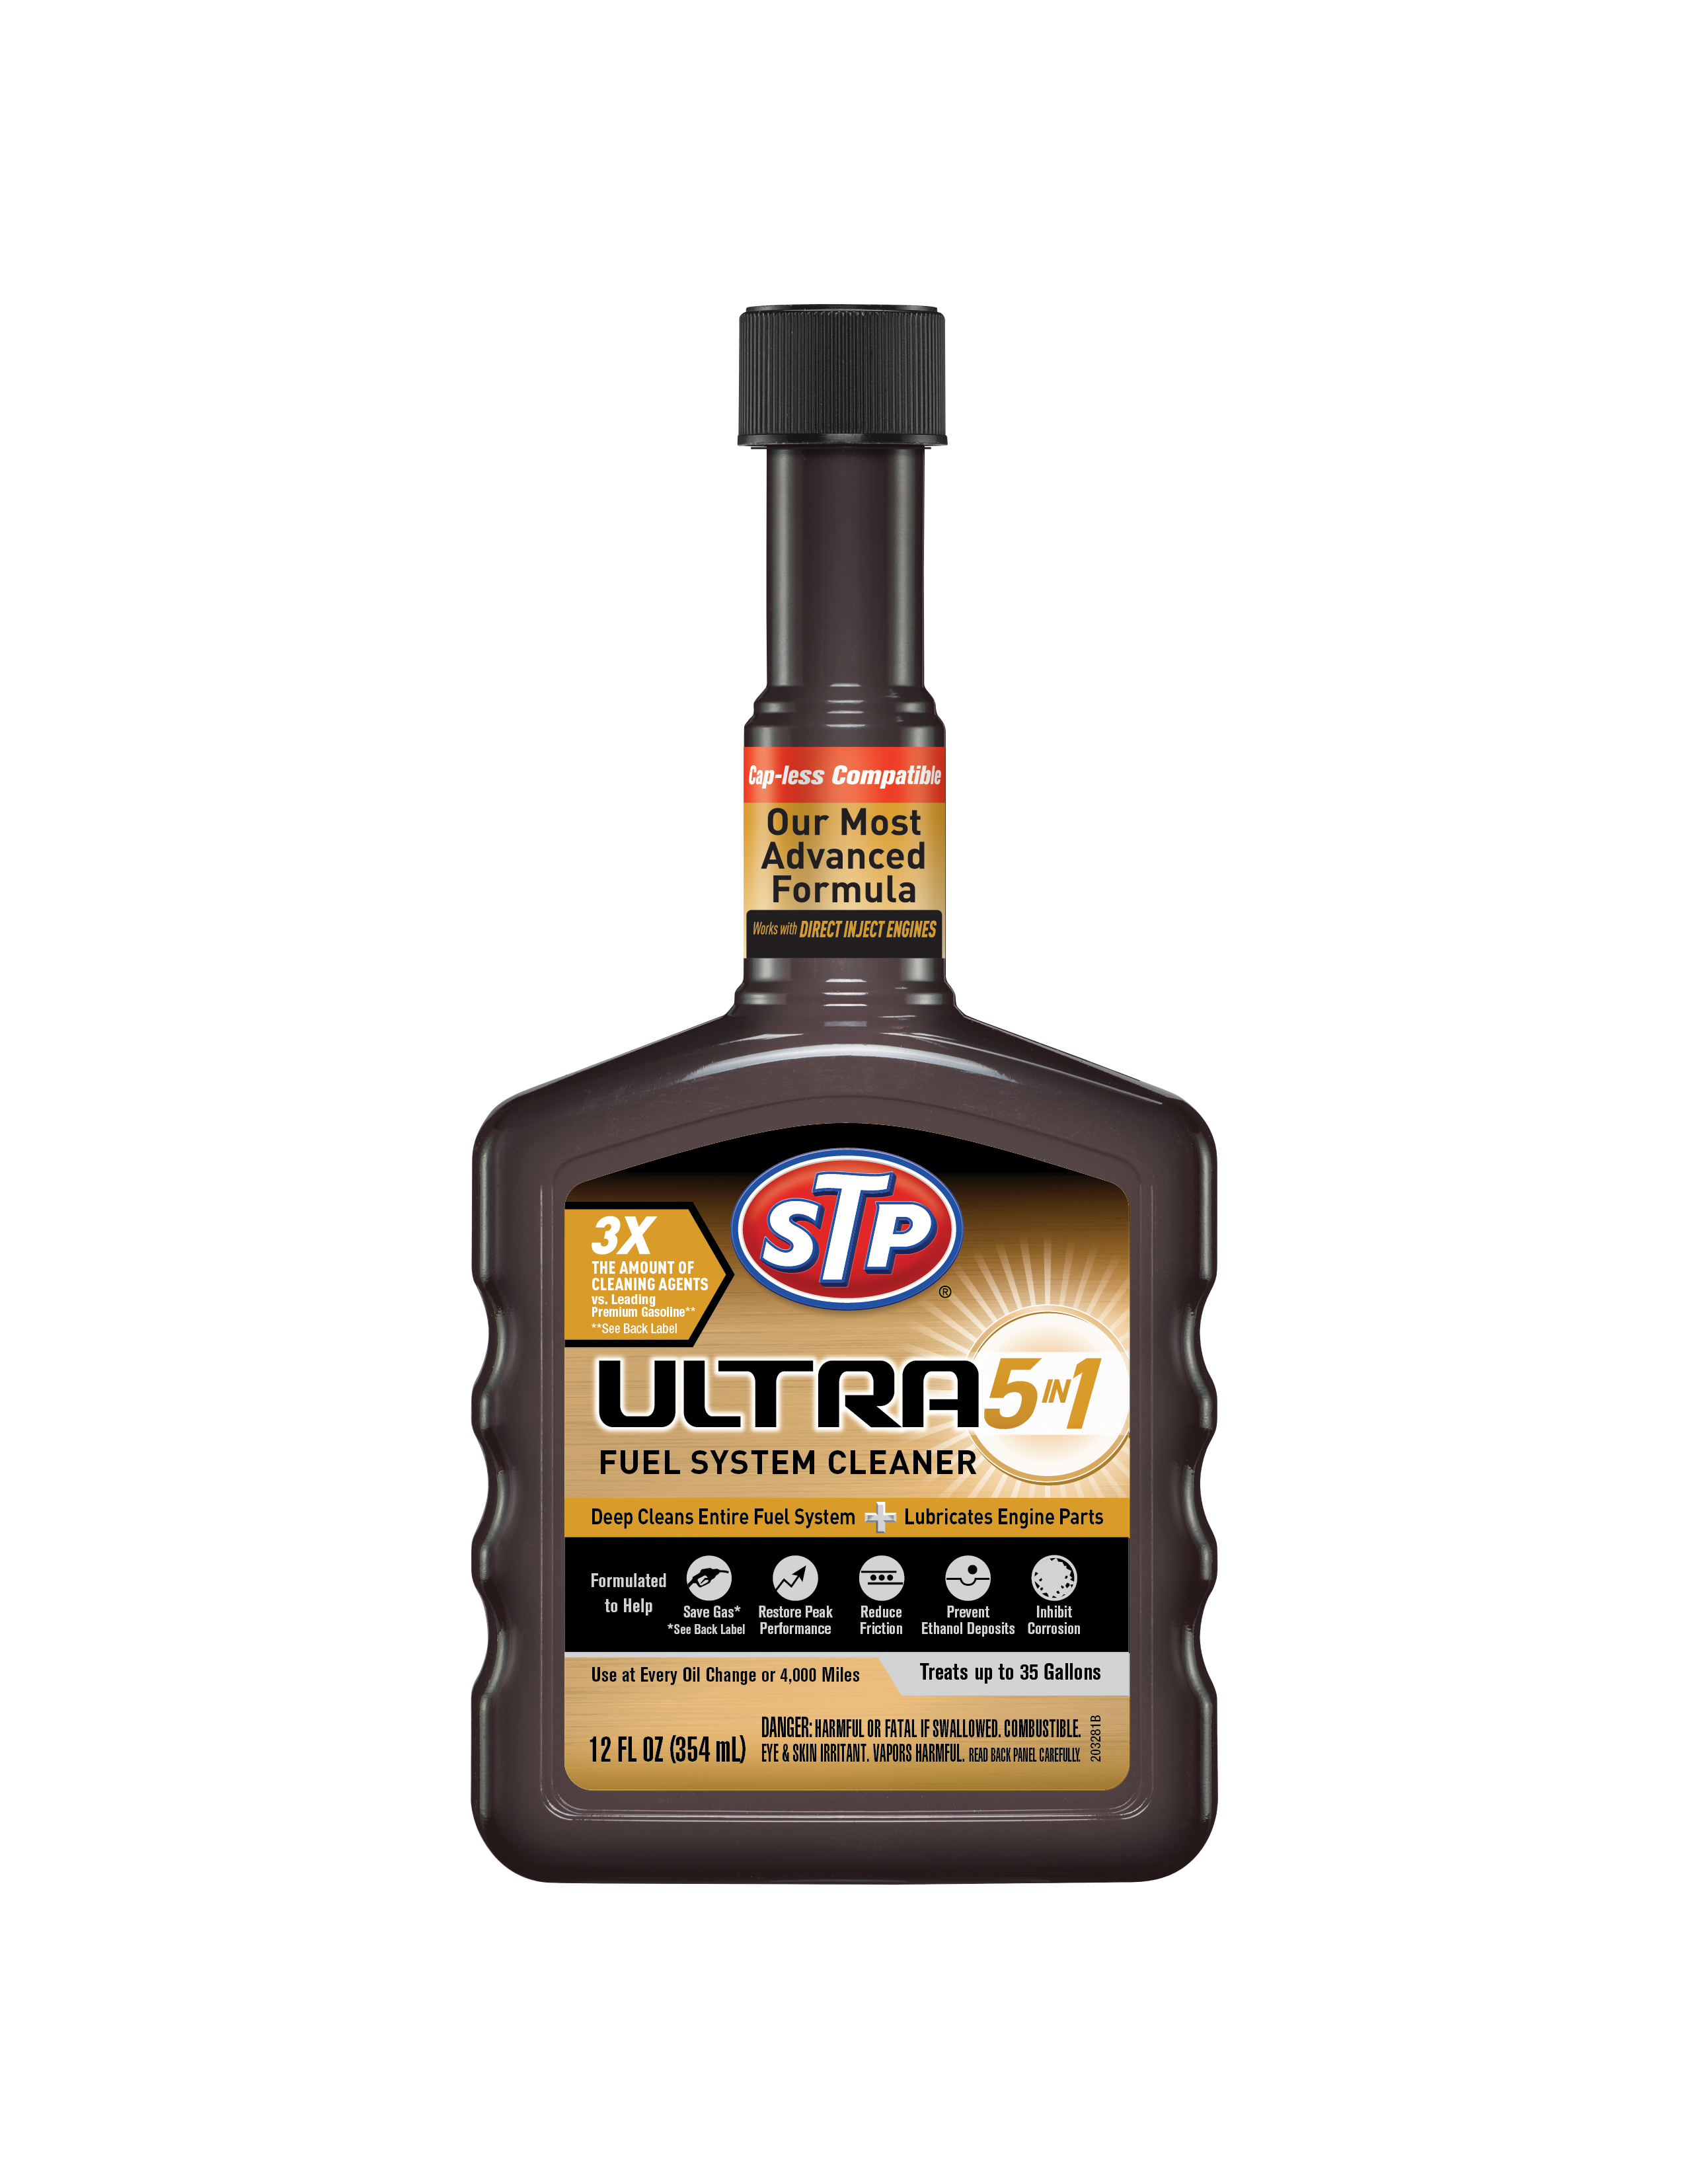 STP (R) Ultra 5 in 1 Fuel System Cleaner - 12 OZ - image 1 of 5